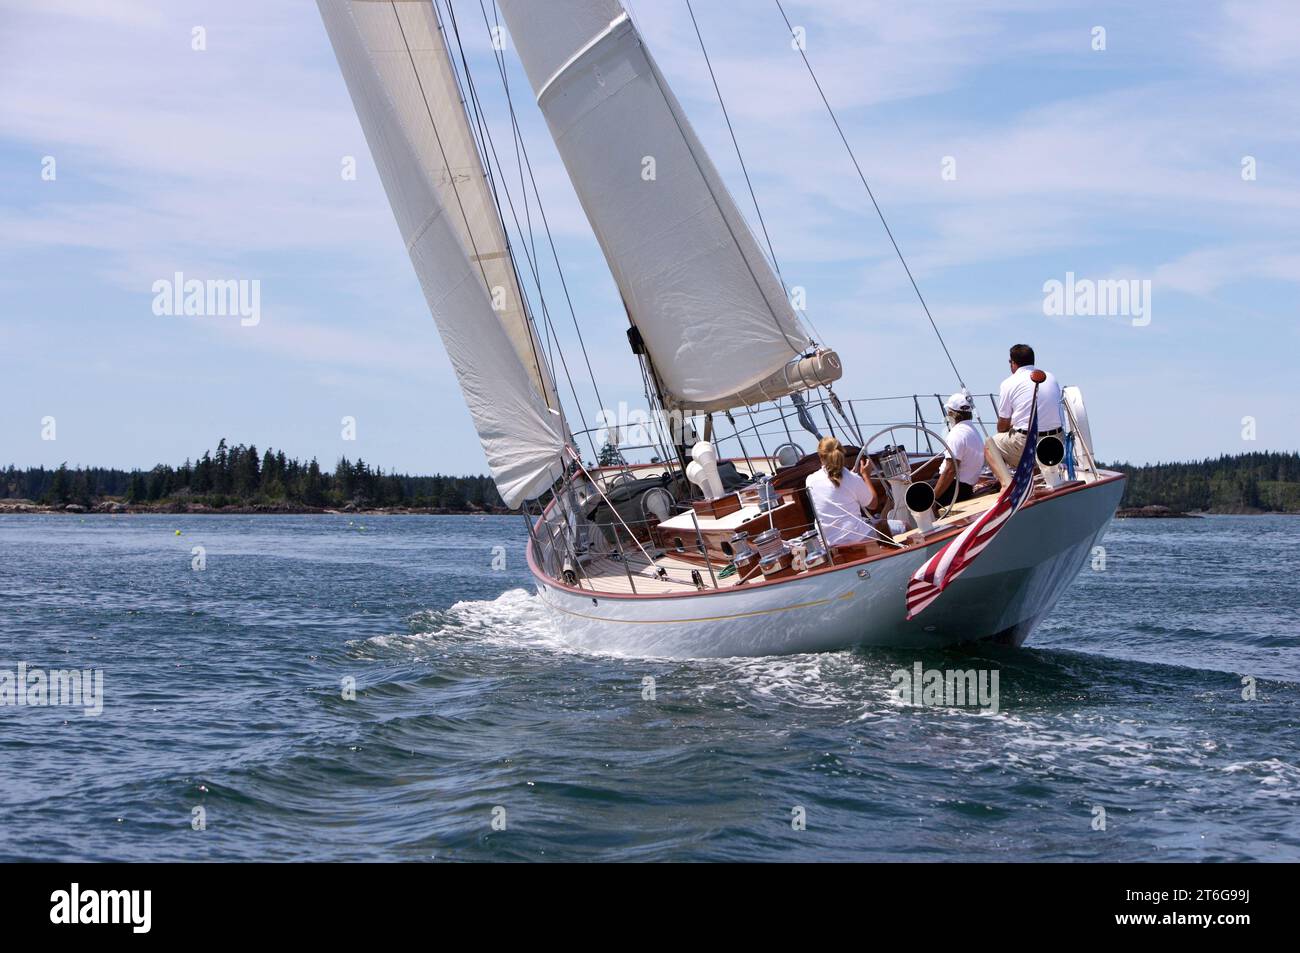 A classic wooden yacht sails through the Fox Island Thoroughfare off the coast of Maine. Stock Photo